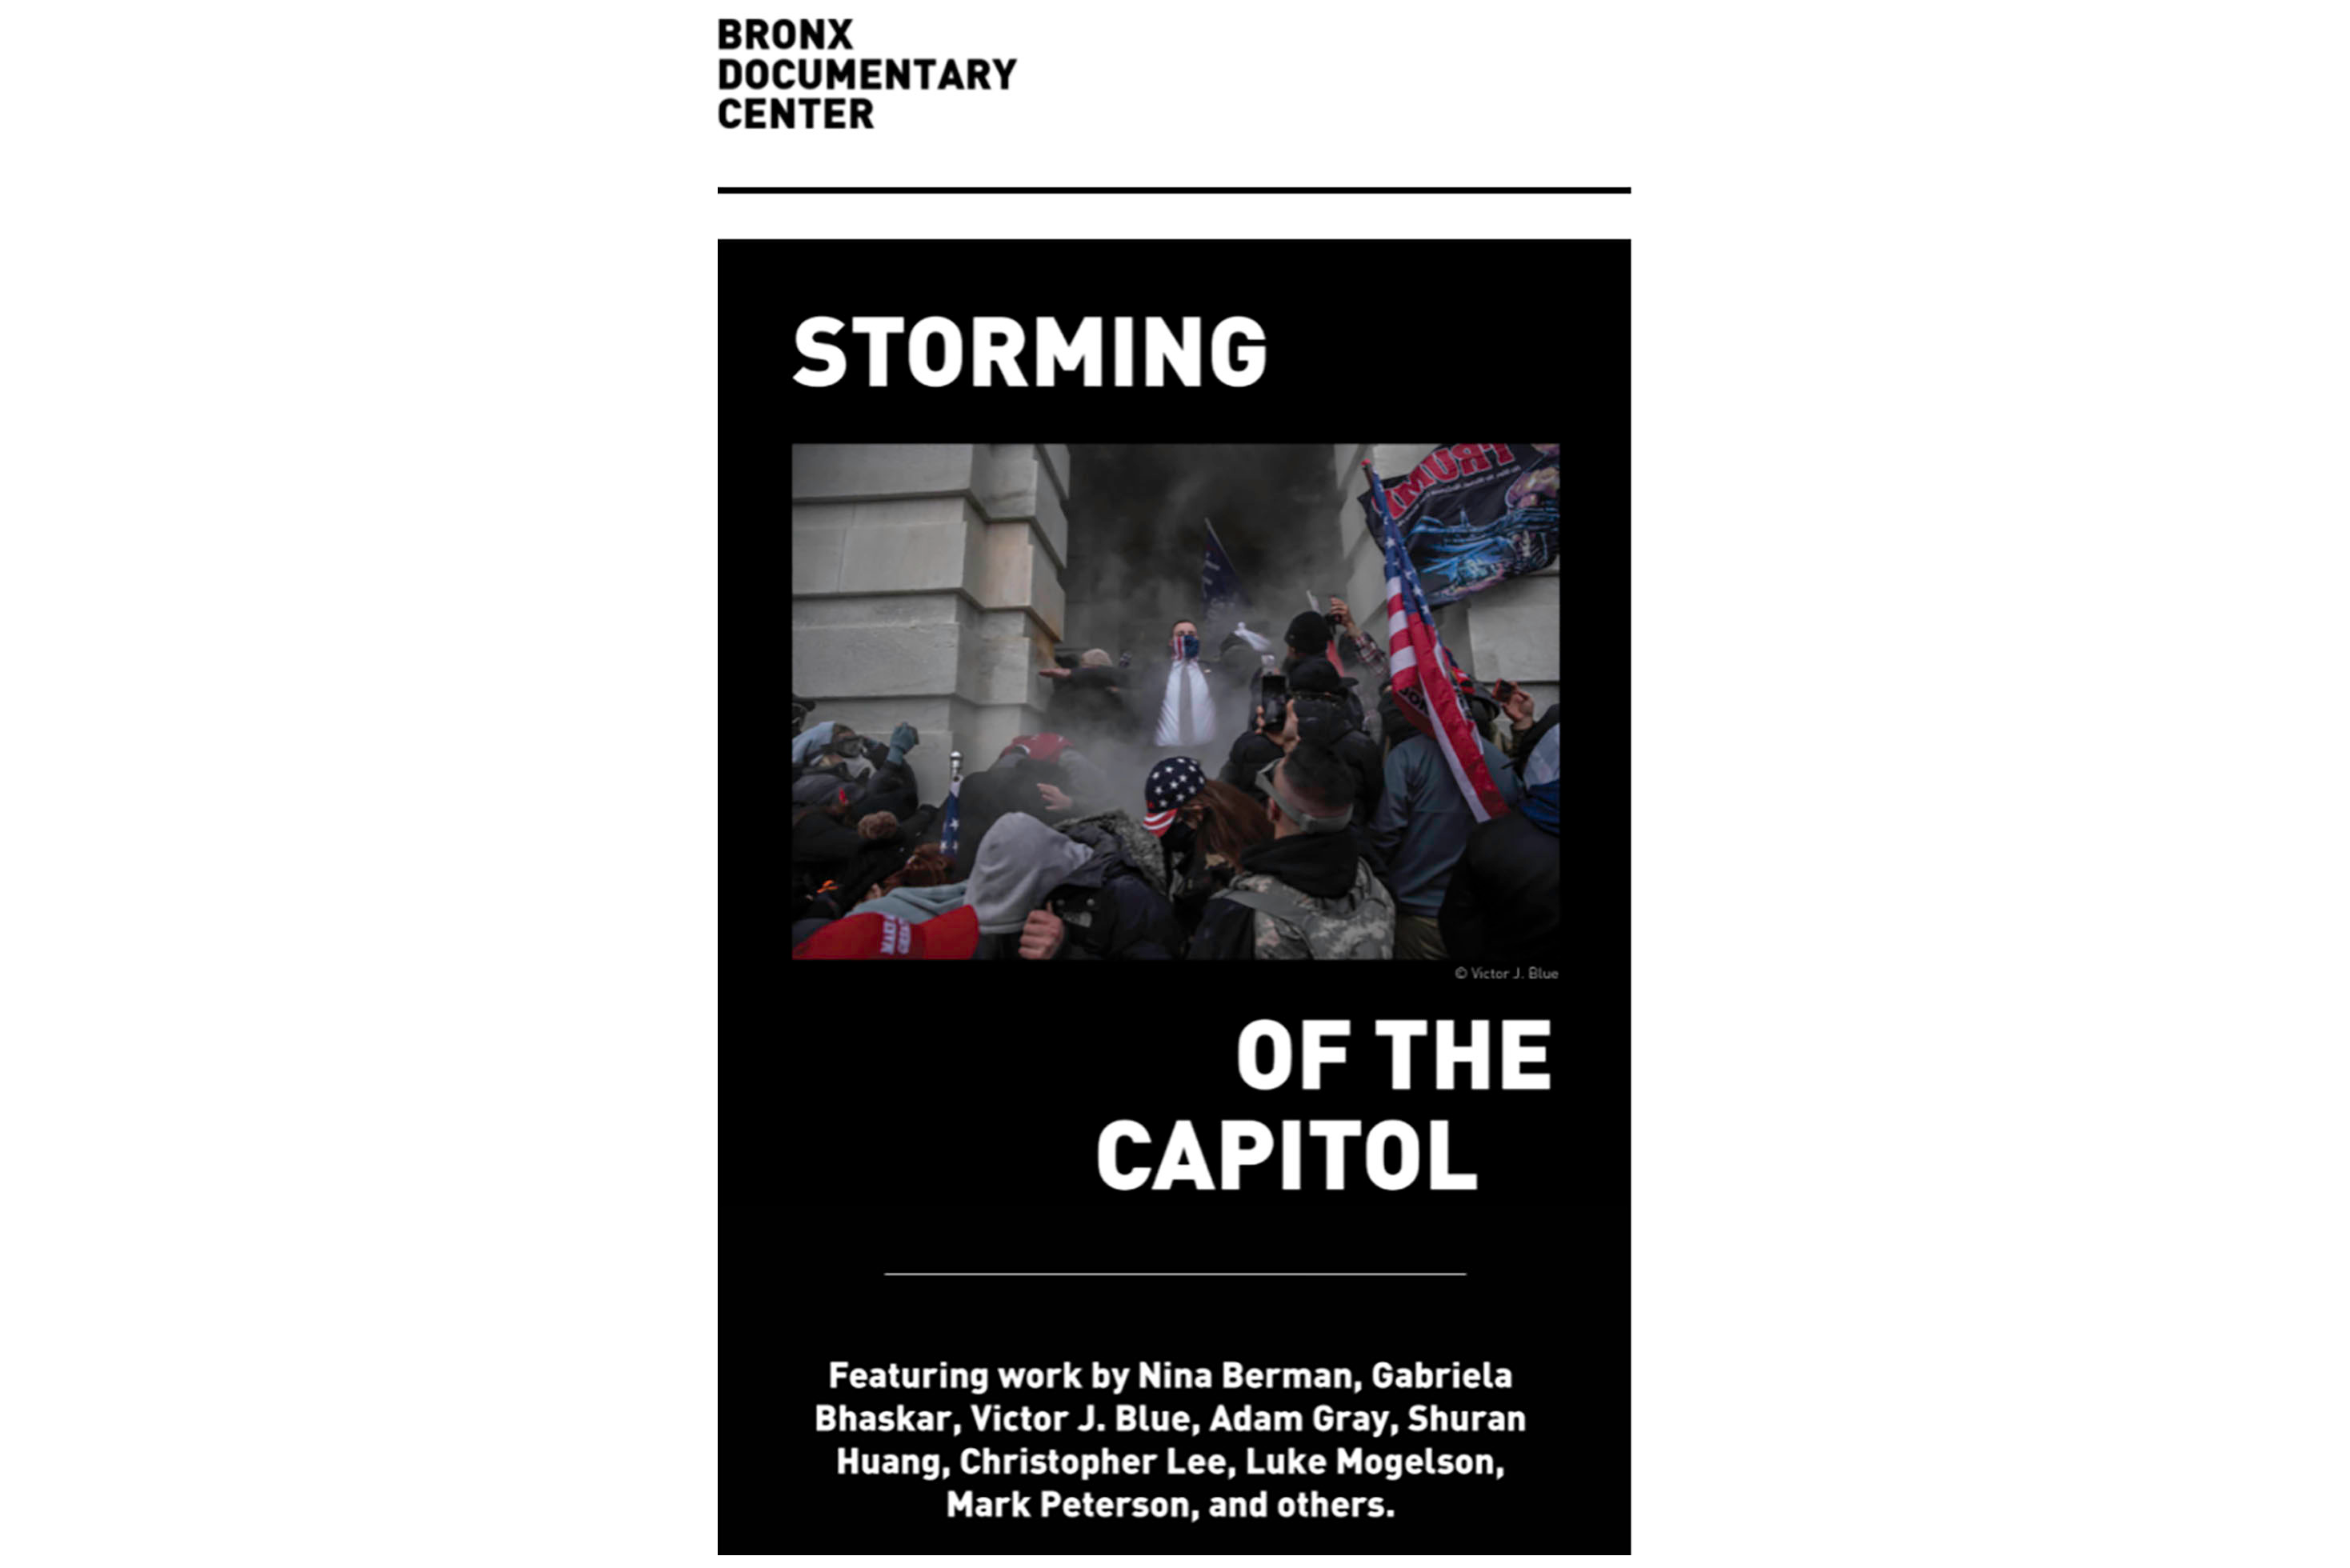 On Bronx Documentary Center: Featured in "Storming of the Capitol" Exhibition